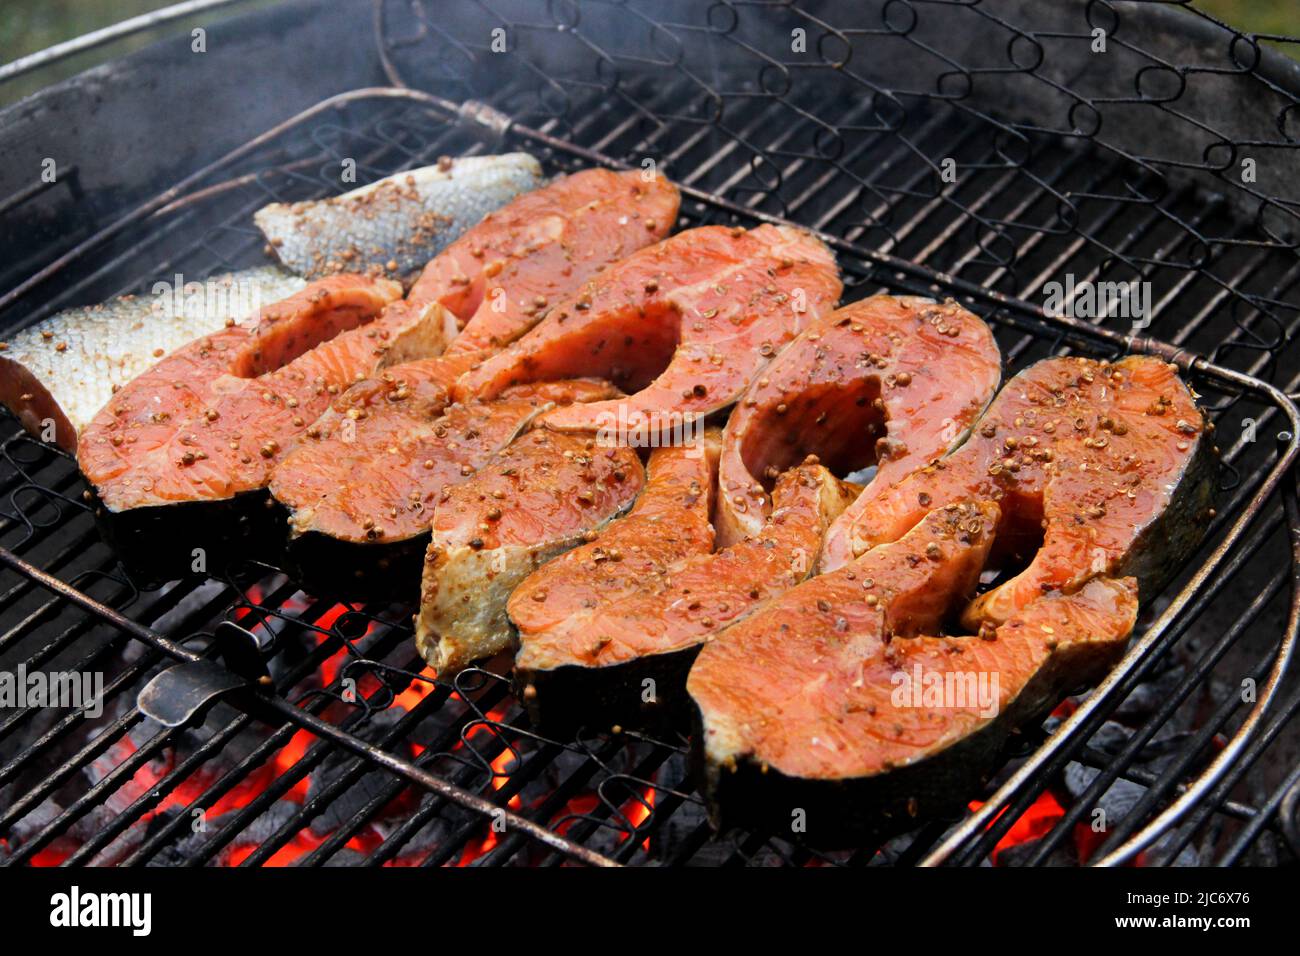 Salmon filet on a barbeque grid. Redfish steaks in the marinade over hot coals. Close-up of grilled salmon steaks. Stock Photo